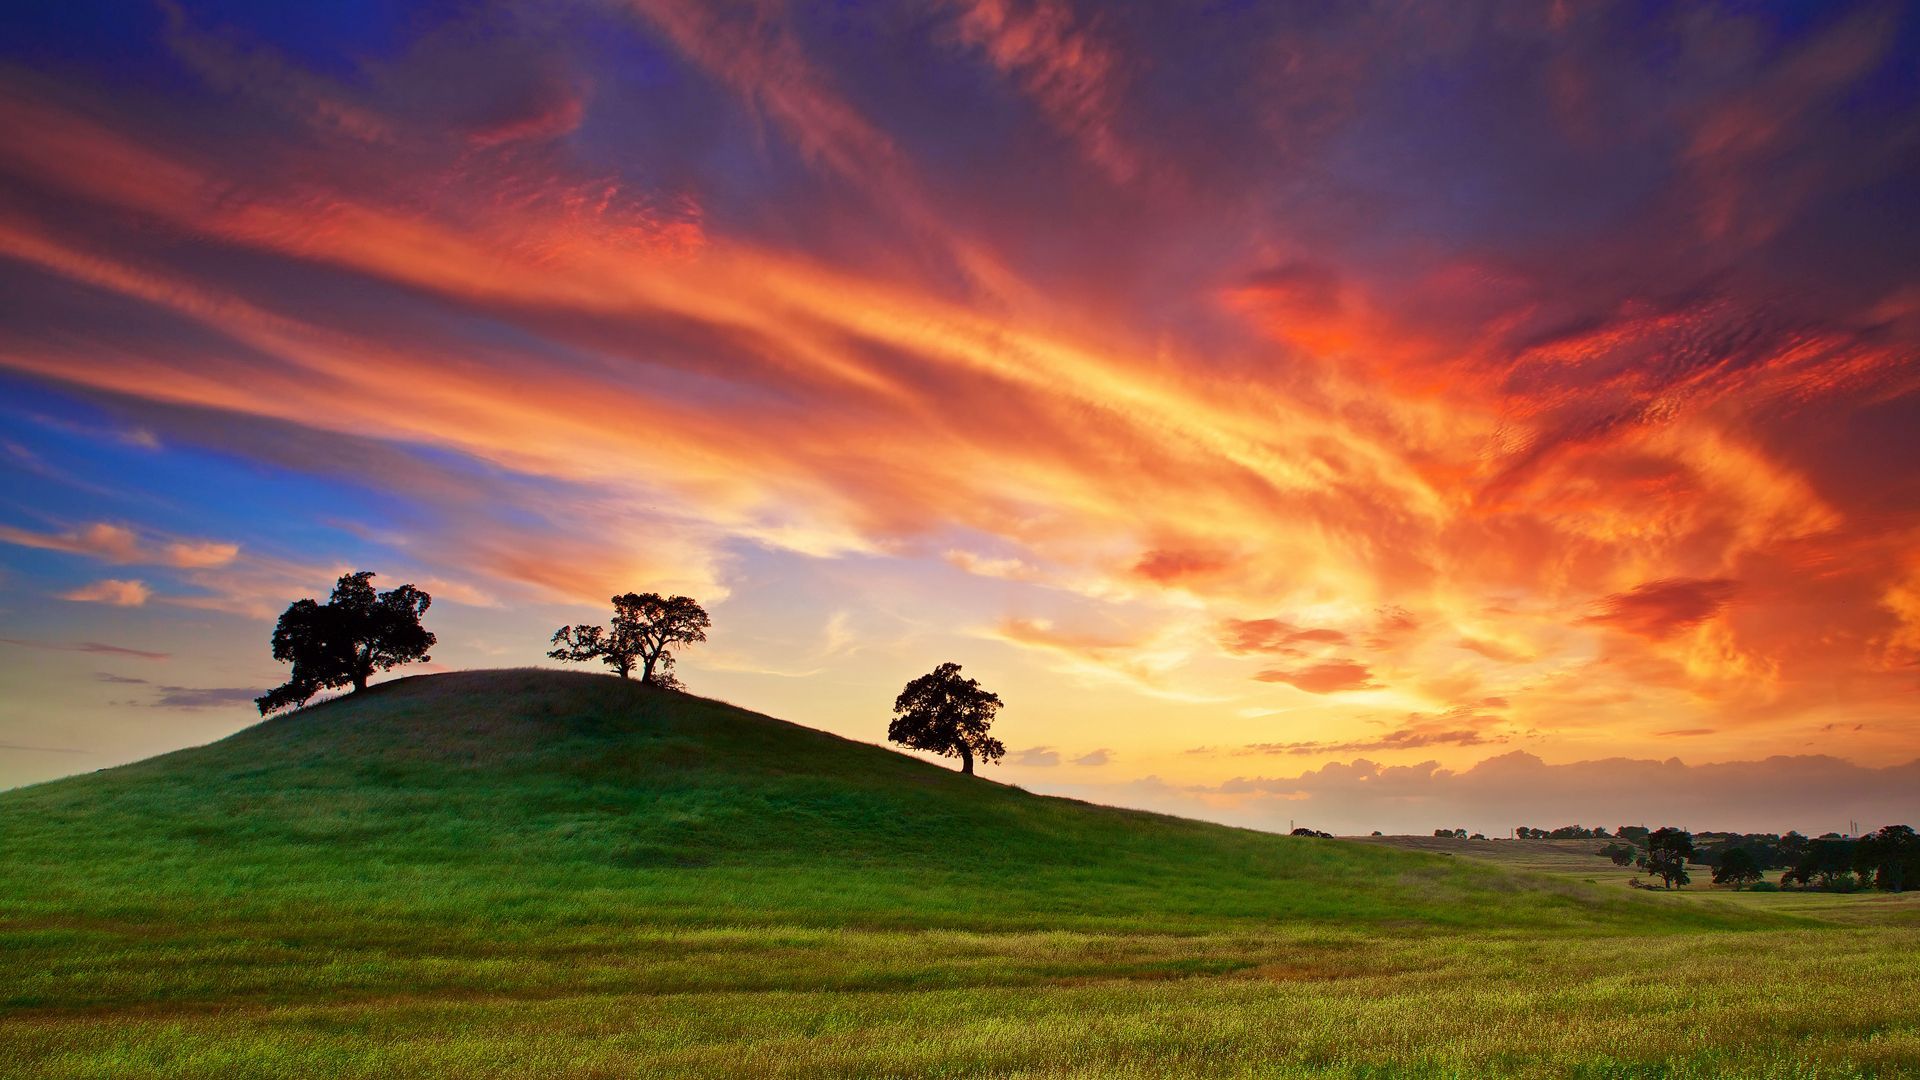 Download wallpaper 1920x1080 usa, california, sunset, spring, may, sky, clouds, field, grass, trees full hd, hdtv, fhd, 1080p HD background